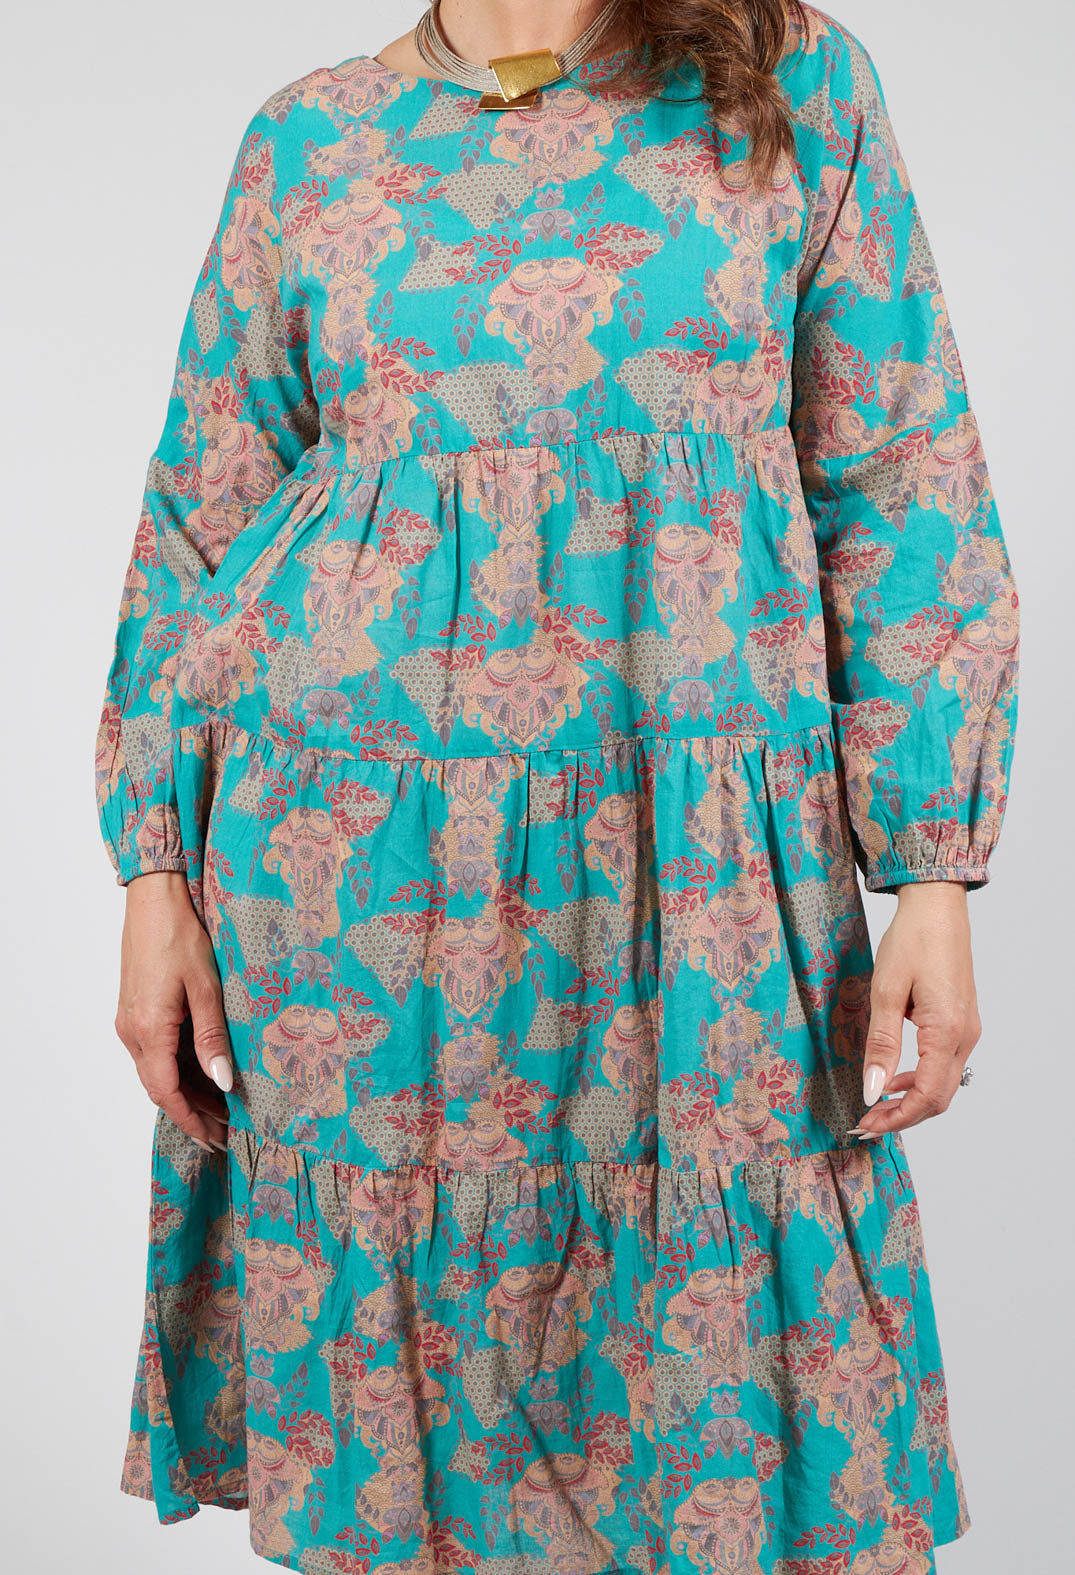 Tiered Vision of Love Dress in Turquoise with All over Print